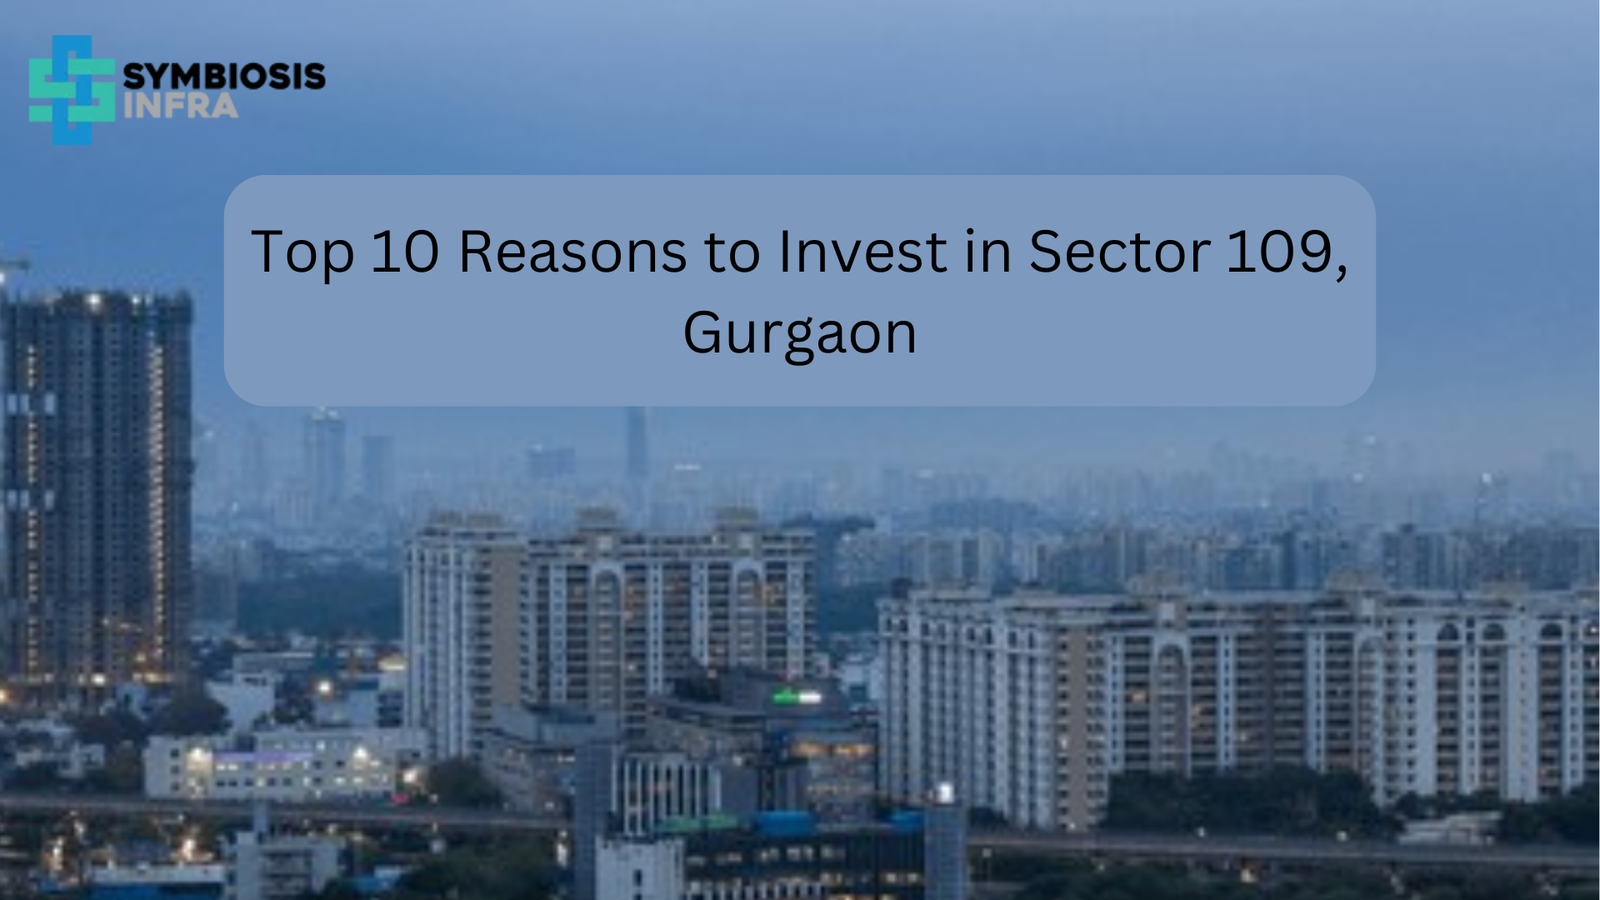 Top 10 Reasons to Invest in Sector 109, Gurgaon